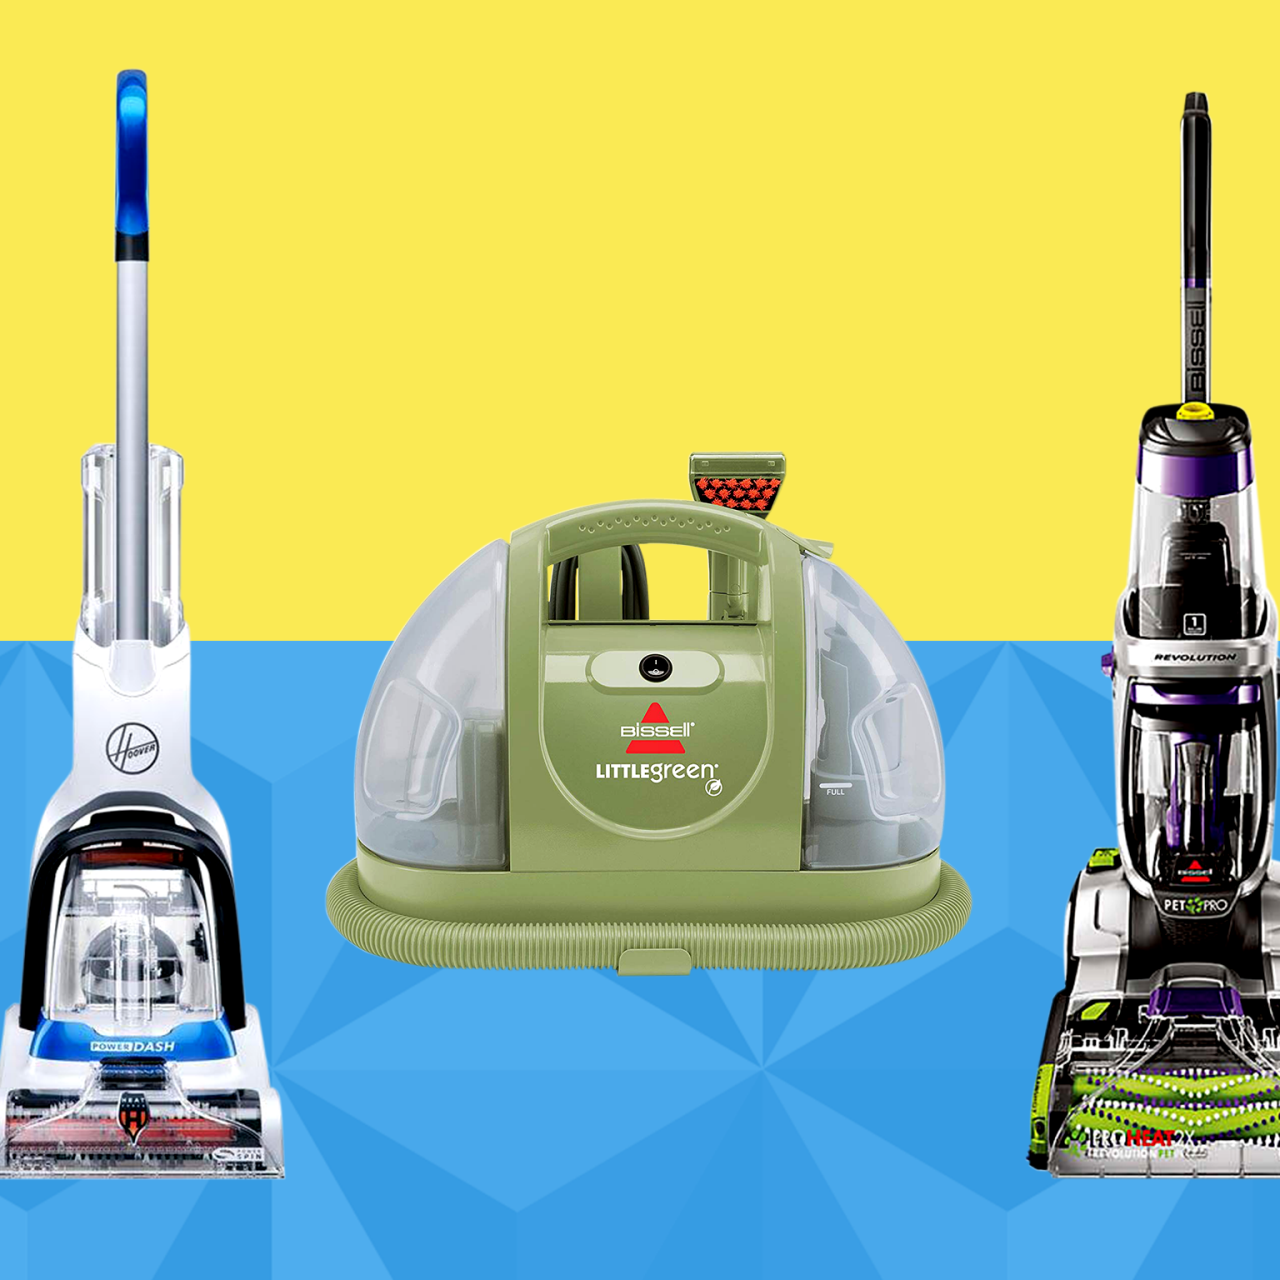 The 2 Best Carpet Cleaners of 2024